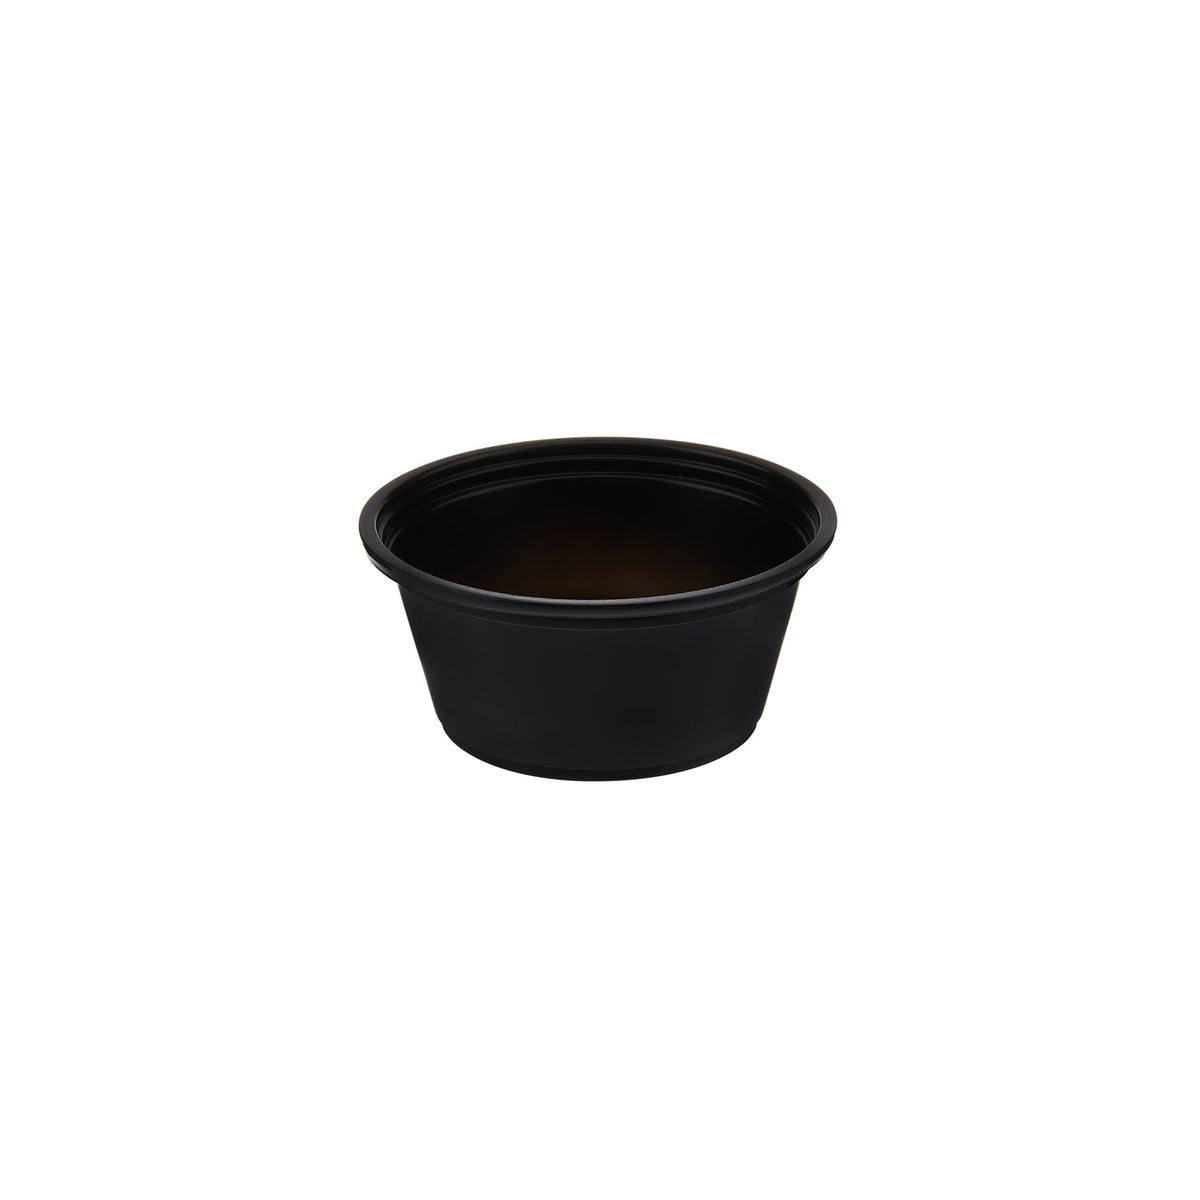 2500 Pieces 3 Oz Black Portion Cup With Clear Lid 80 CC